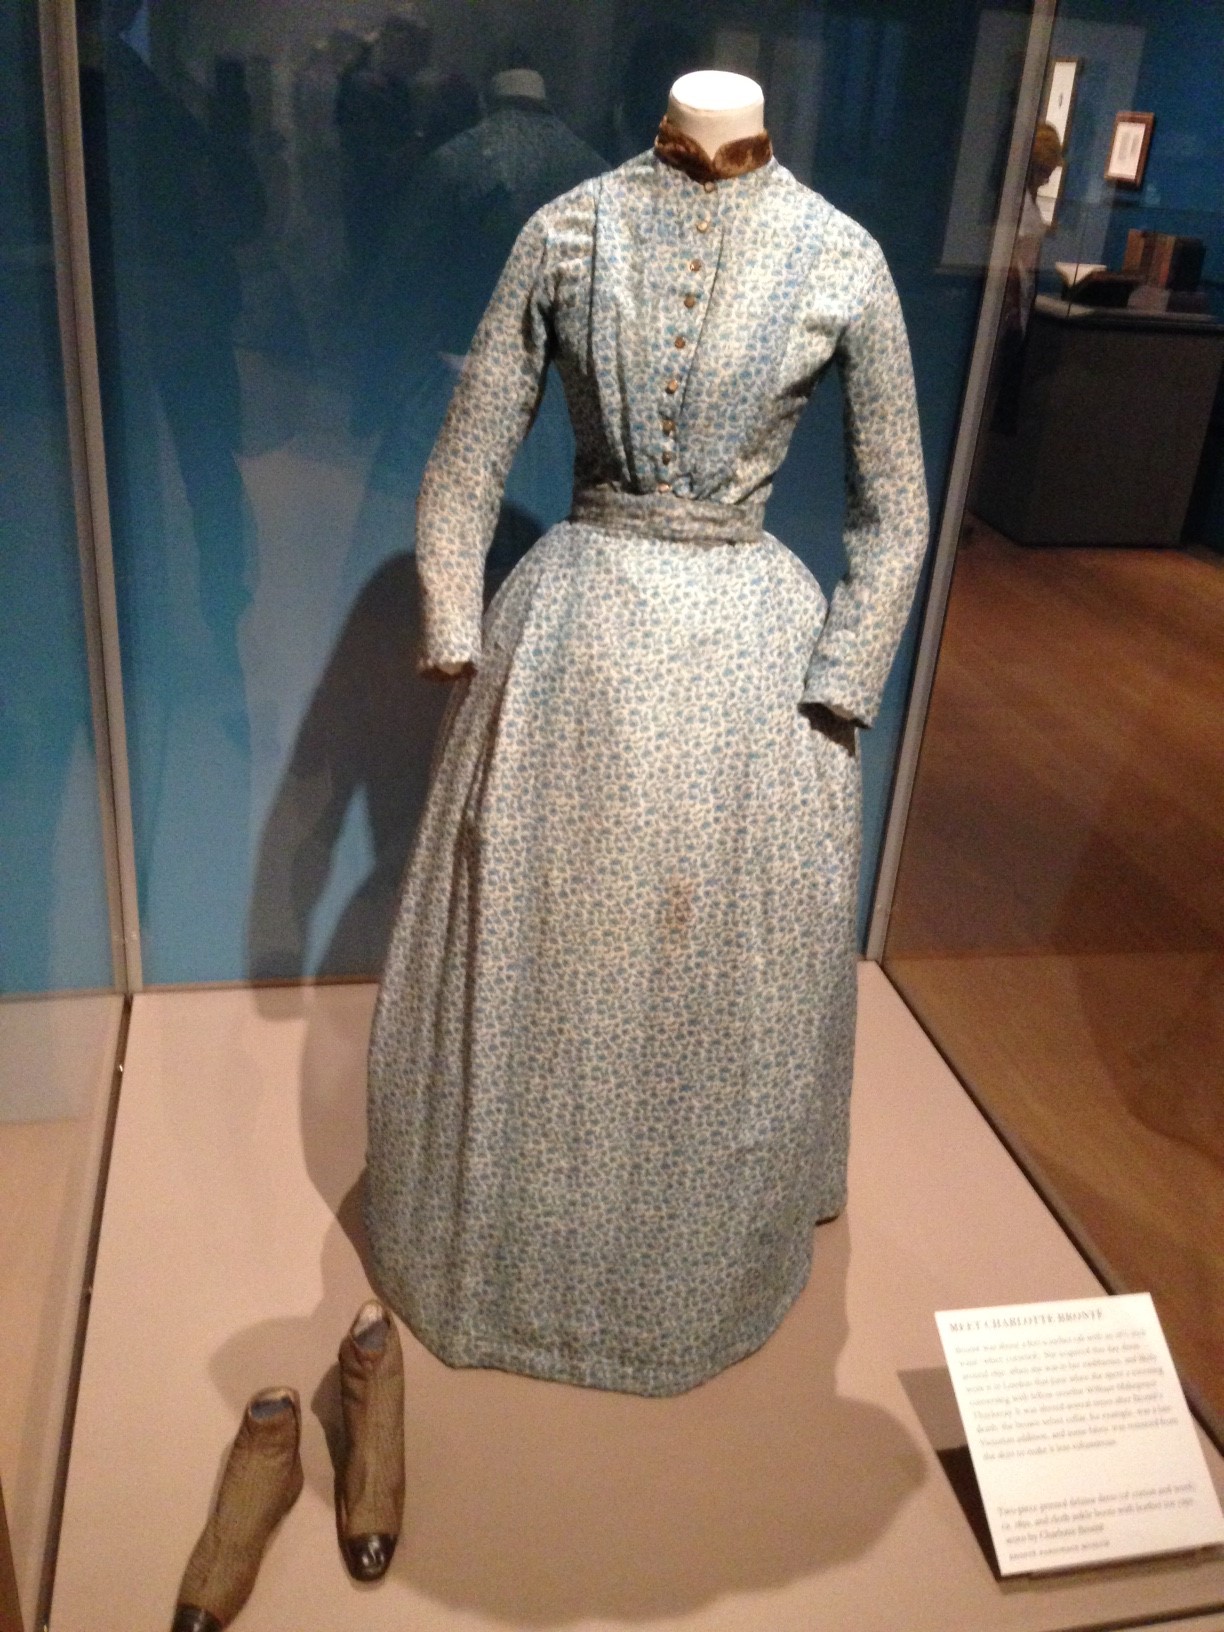 Charlotte Bronte's dress and shoes